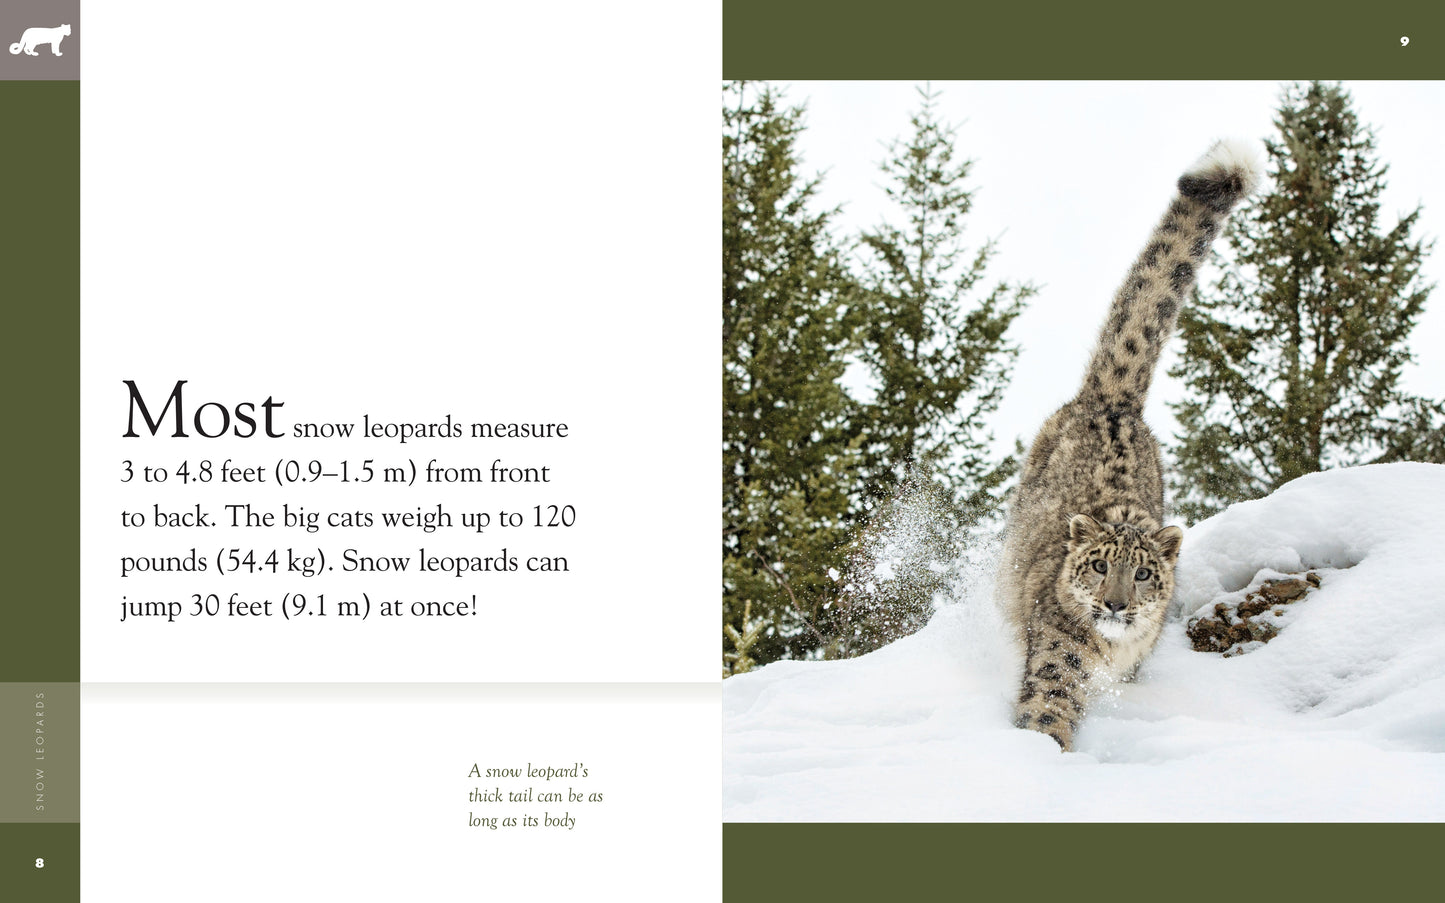 Amazing Animals - Classic Edition: Snow Leopards by The Creative Company Shop